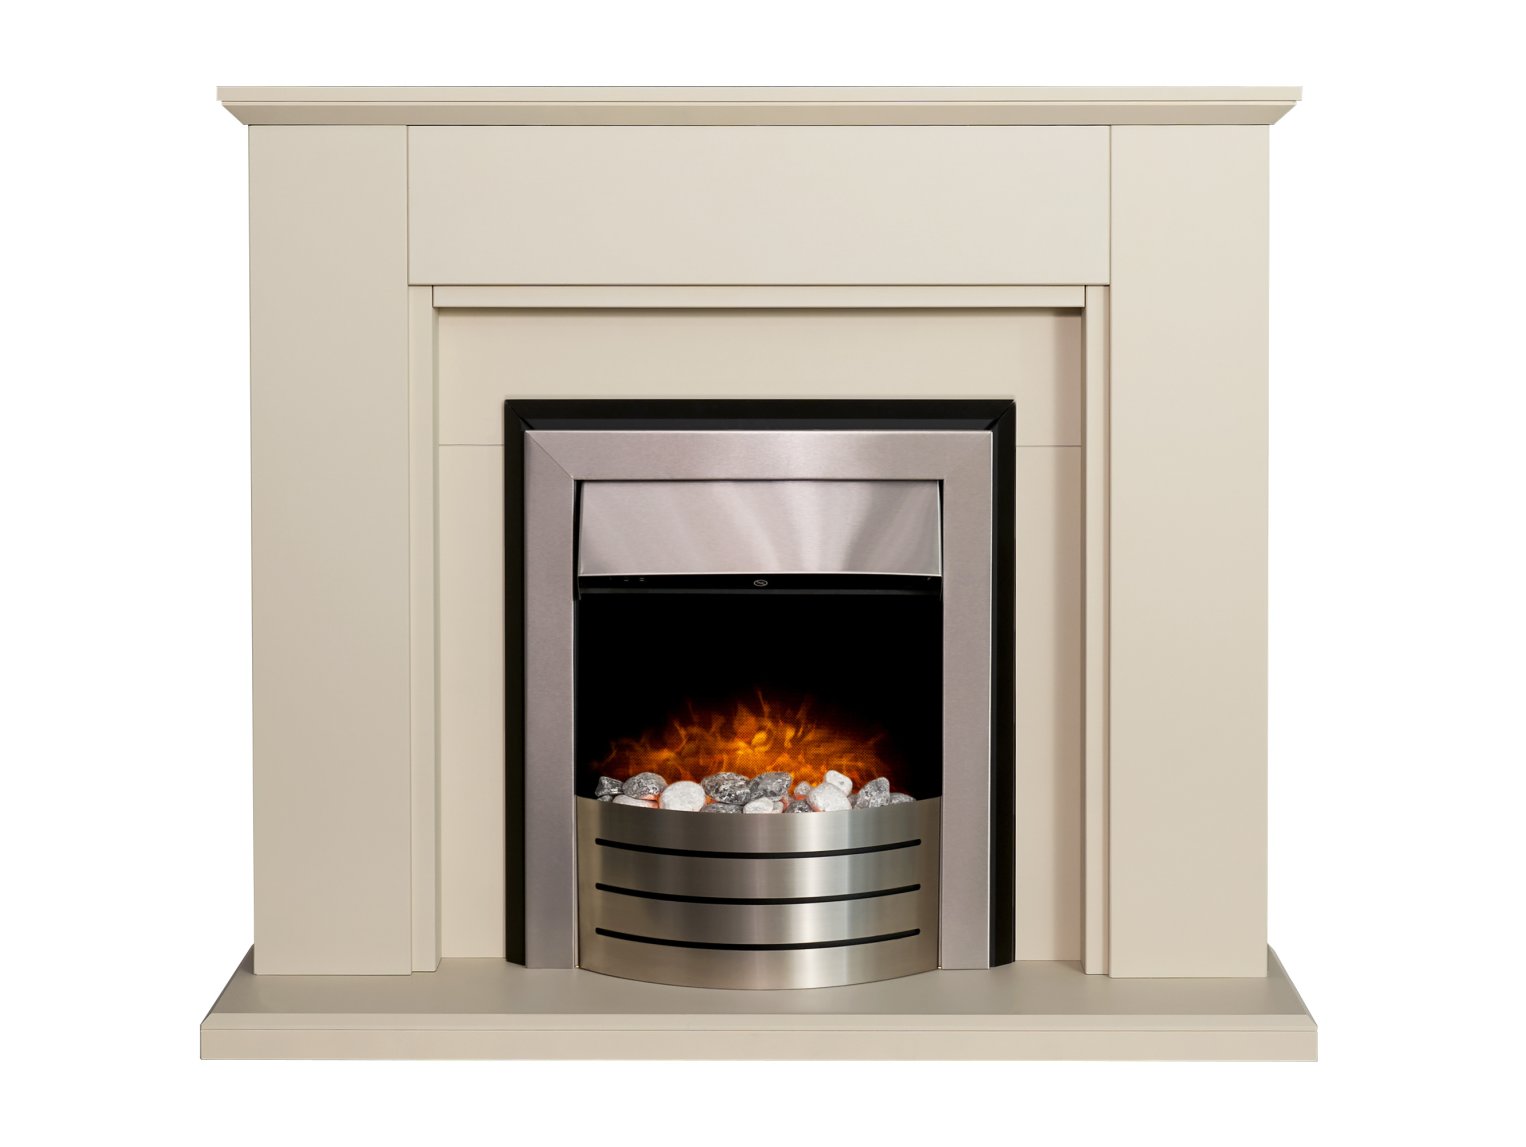 Adam Greenwich Fireplace in Stone Effect with Comet Electric Fire in Brushed Steel, 45 Inch